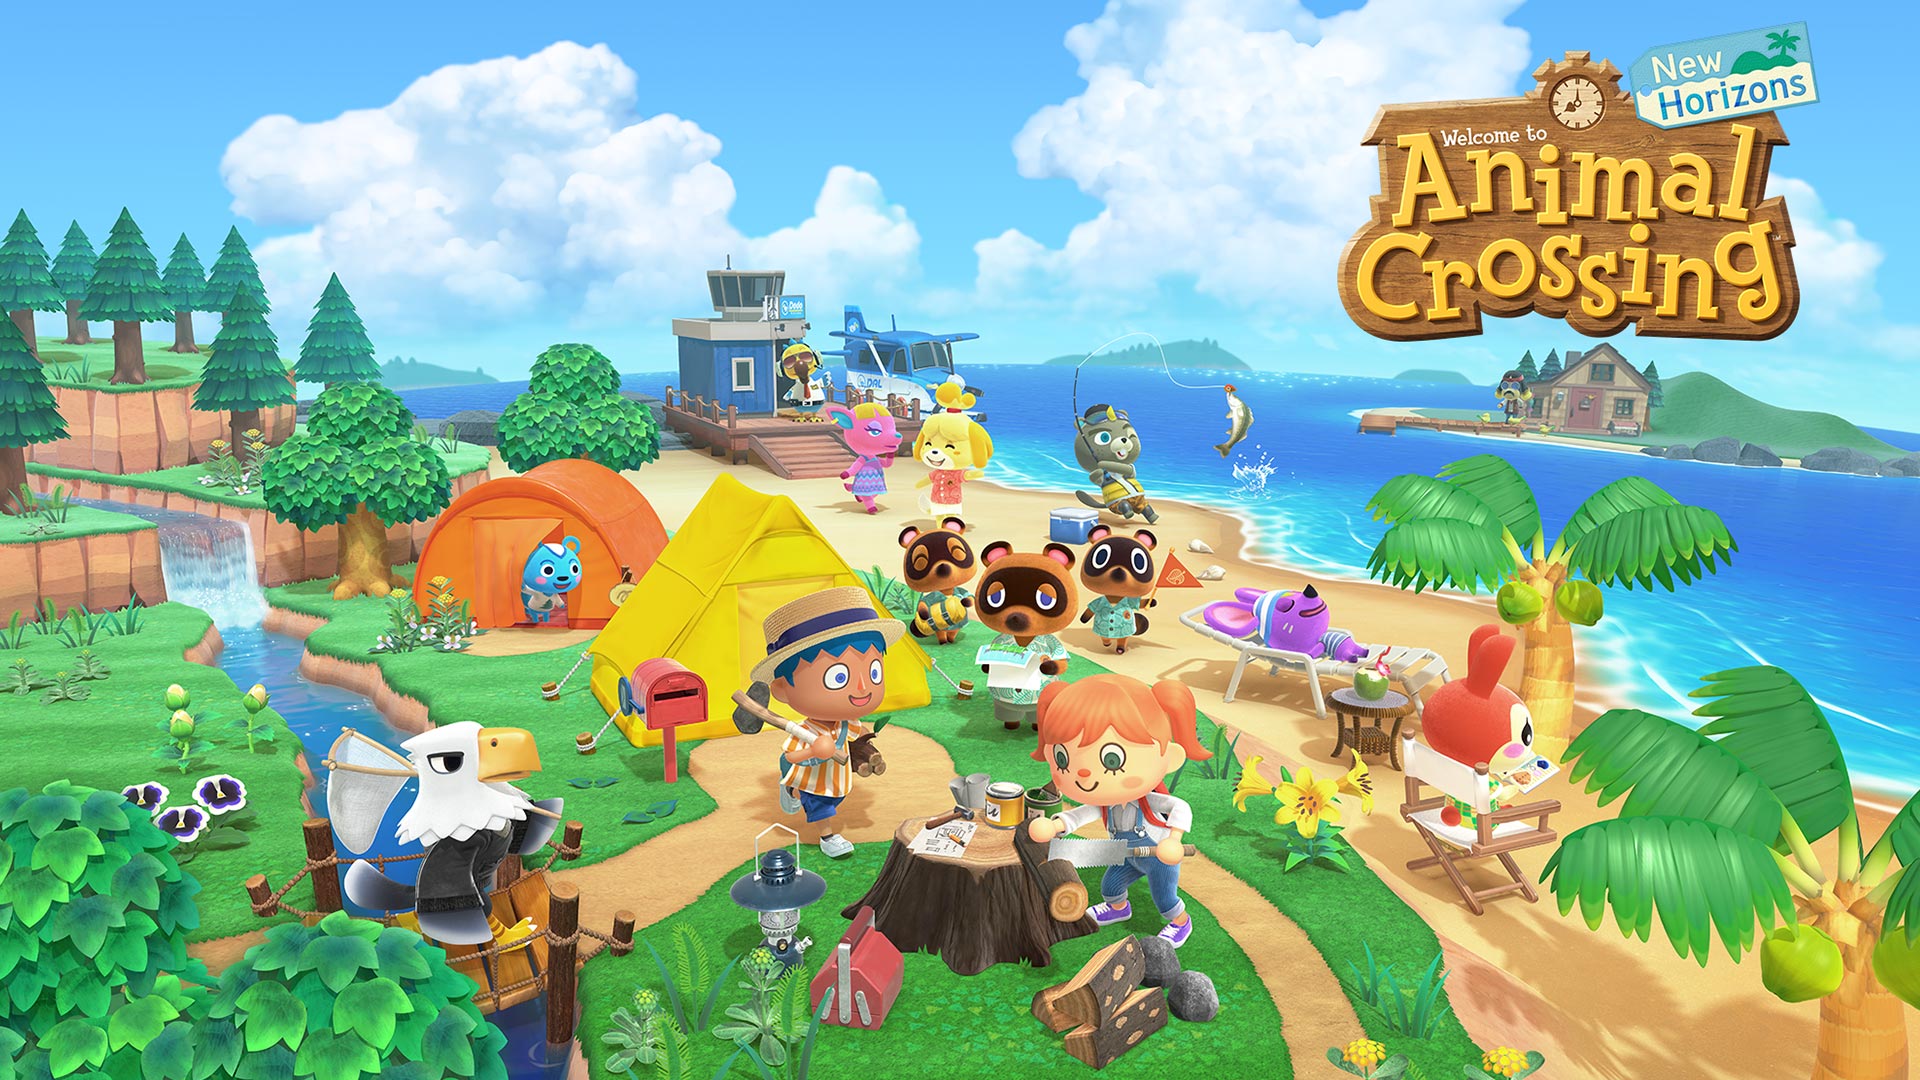 Animal Crossing New Horizons is the game helping build community between kids